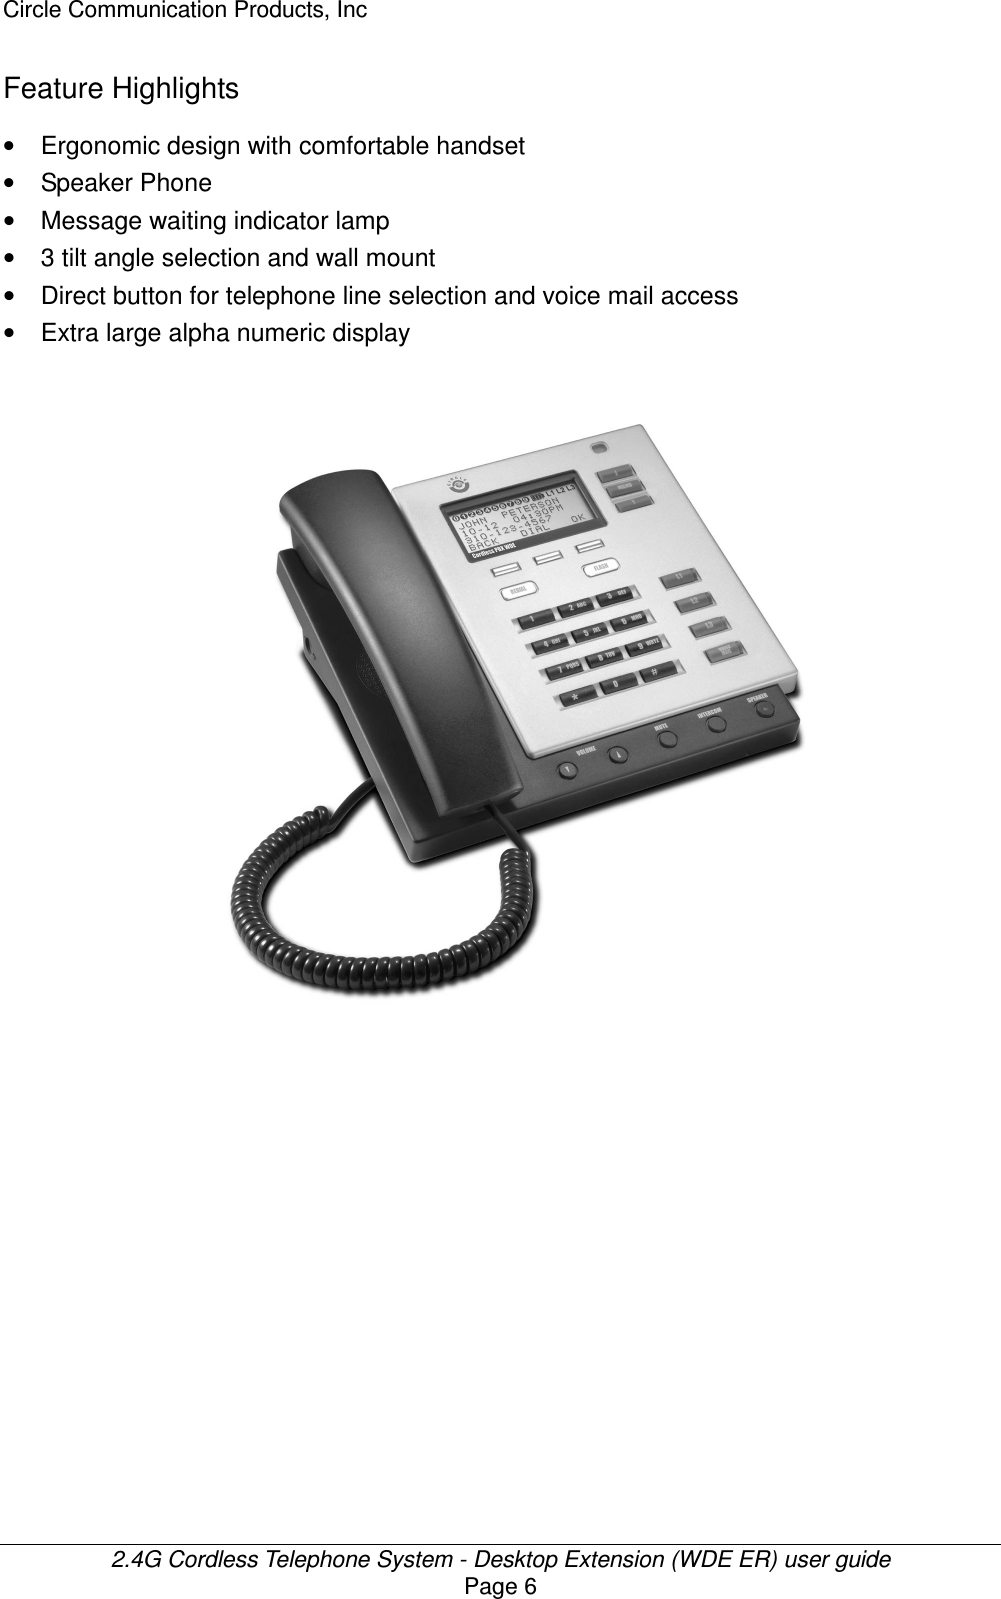 Circle Communication Products, Inc  2.4G Cordless Telephone System - Desktop Extension (WDE ER) user guide Page 6 Feature Highlights •  Ergonomic design with comfortable handset •  Speaker Phone •  Message waiting indicator lamp   •  3 tilt angle selection and wall mount •  Direct button for telephone line selection and voice mail access •  Extra large alpha numeric display   